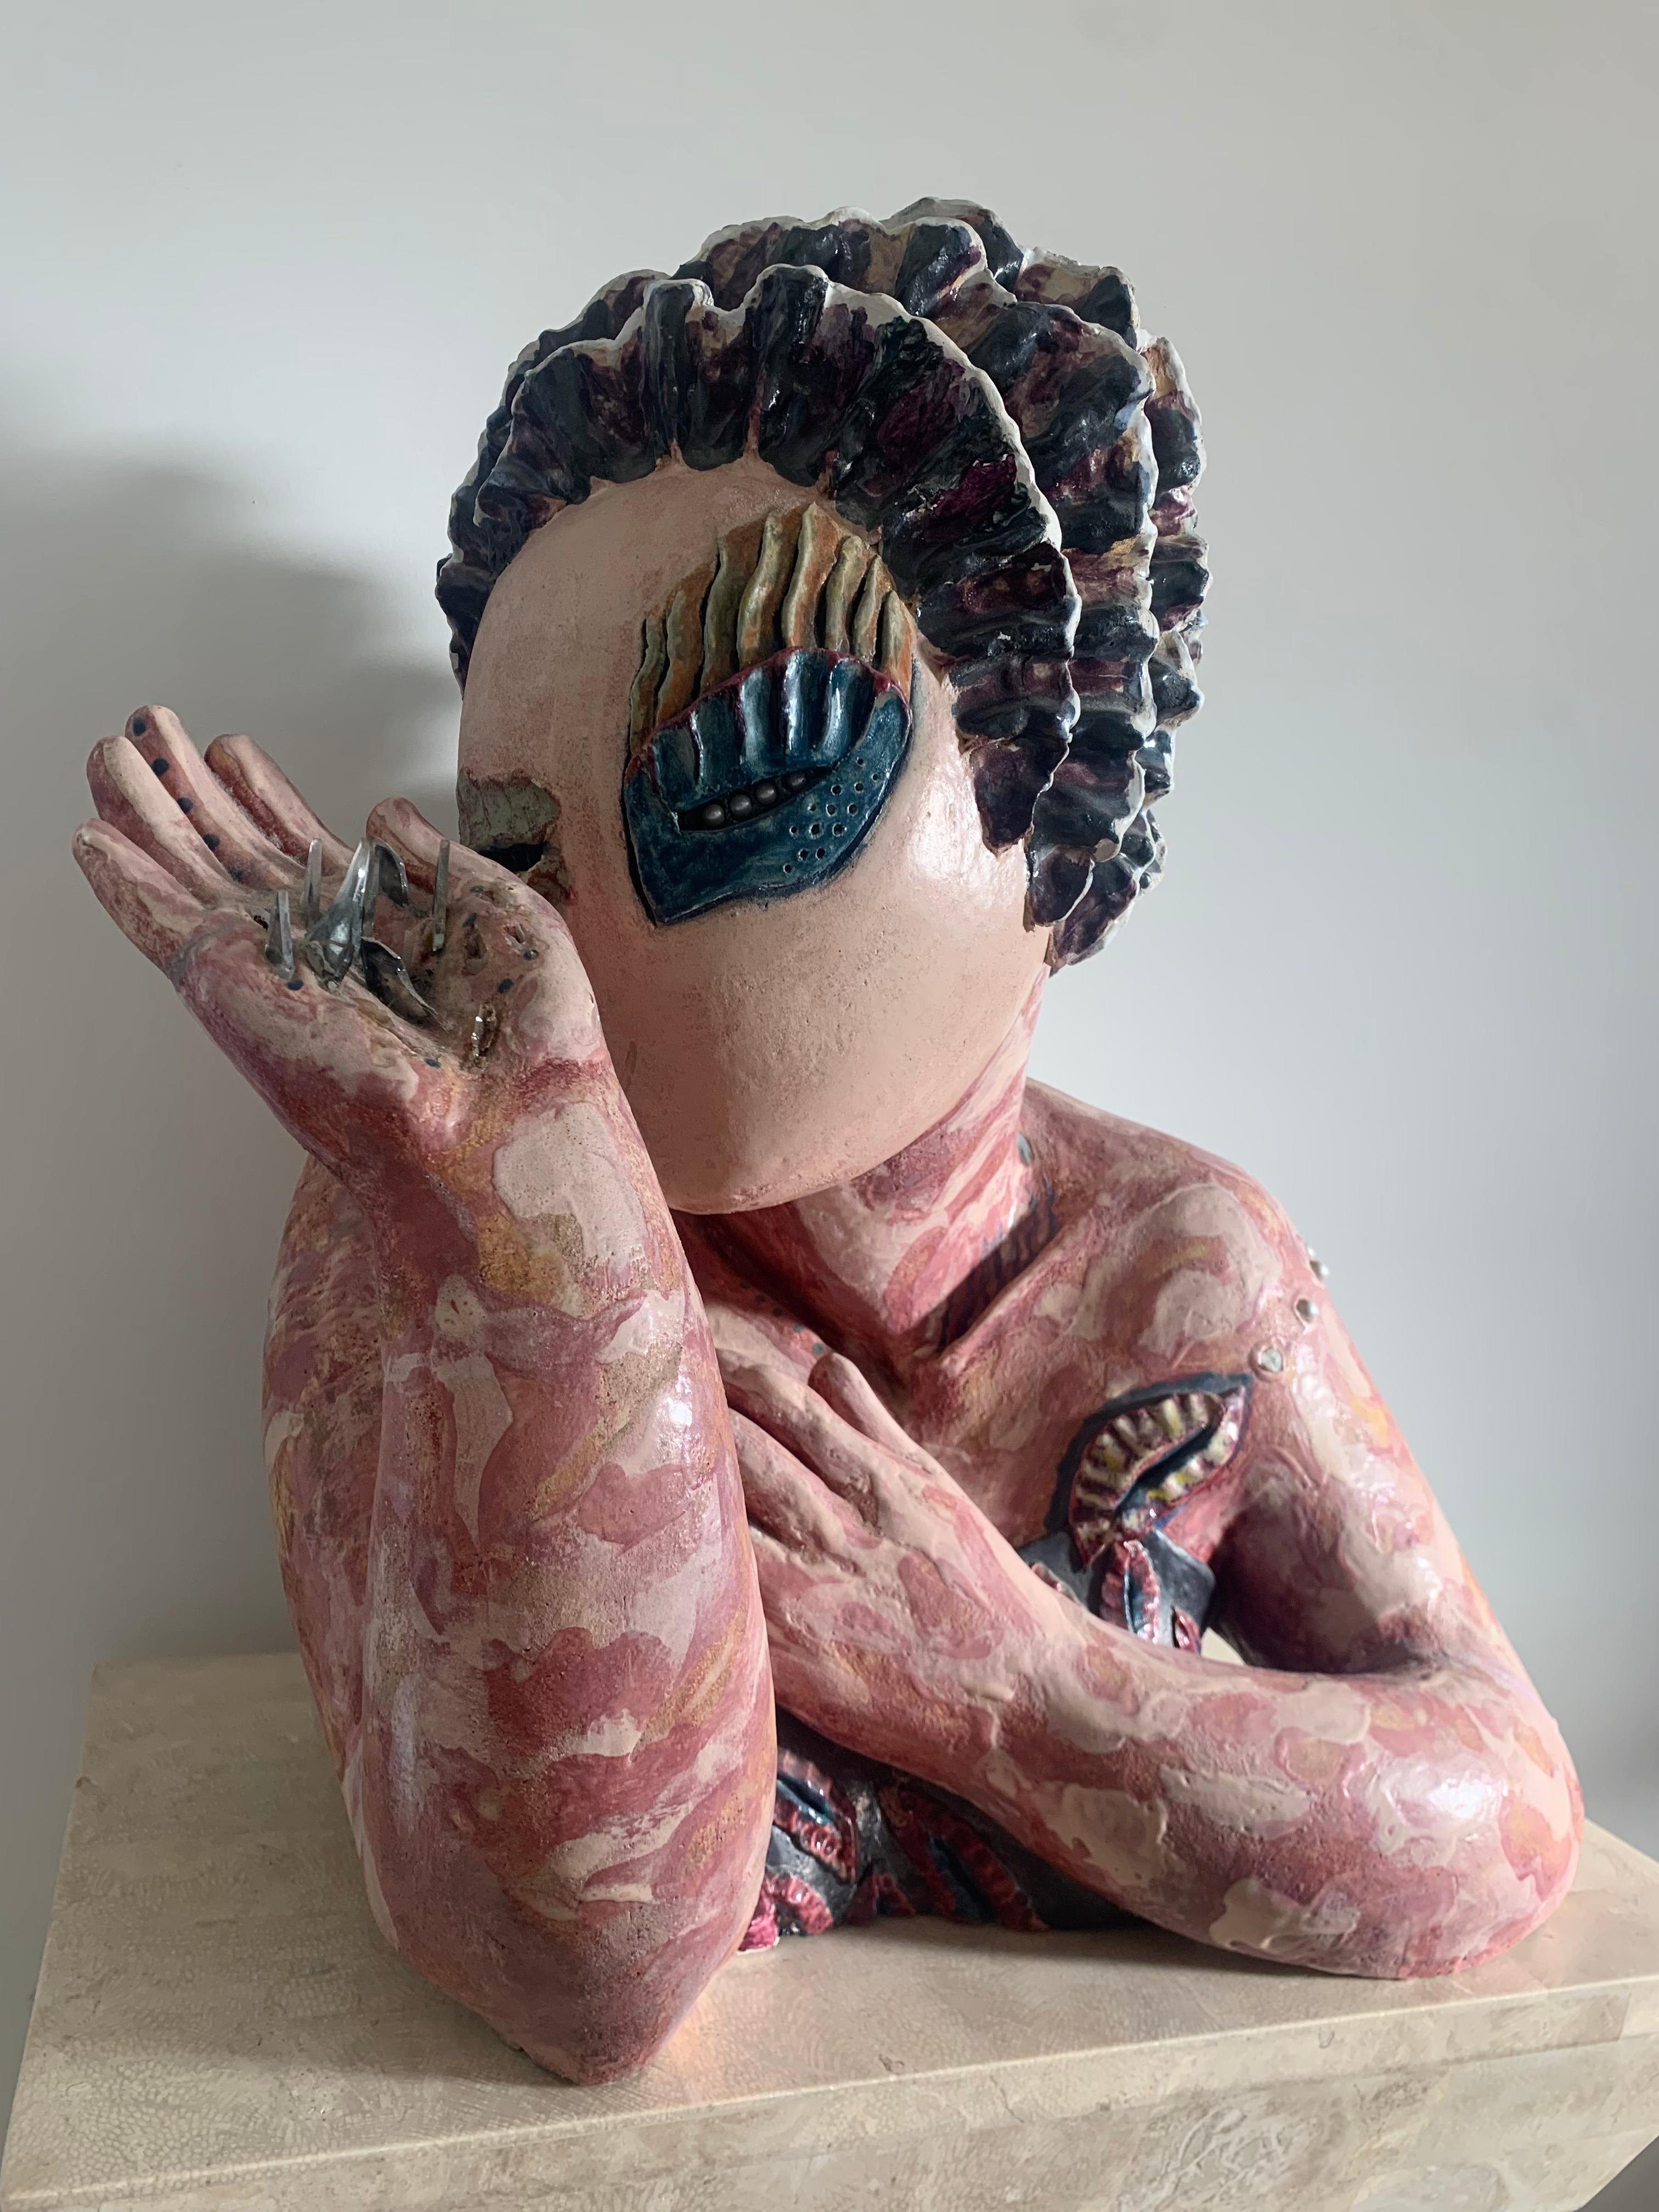 A massive and spectacular sculpture of a femme bust by Nancy Quinn, 20th century. Painted and glazed ceramic with plexiglass shards and inlaid beads. Memphis meets rococo meets punk meets Brancusi. Minor losses but overall in fabulous studio